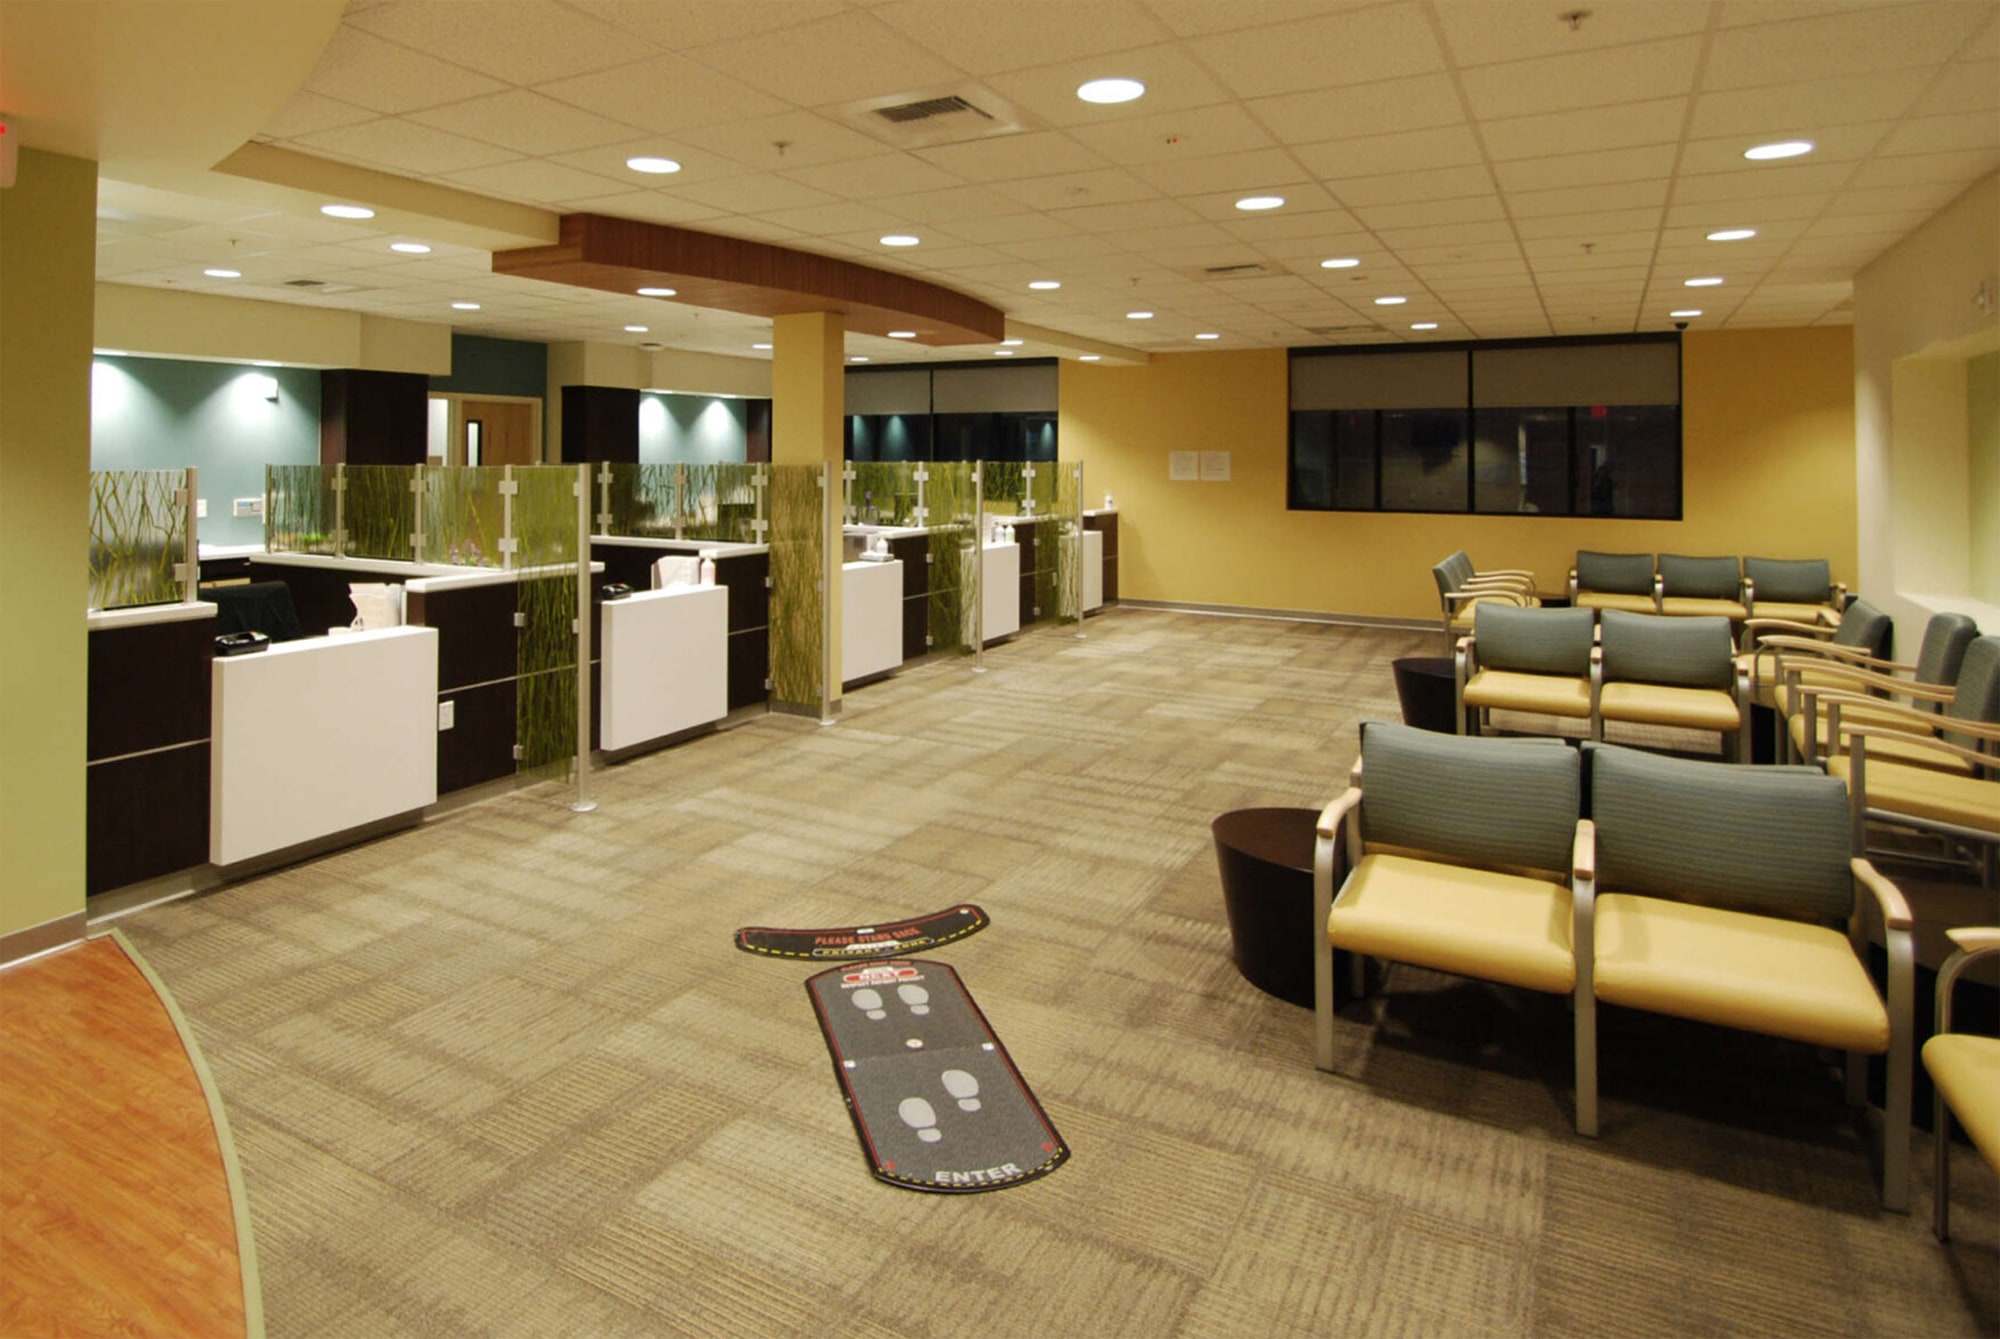 Check-in/admin desks by with waiting couches at the Hillcrest Mental Health Facility